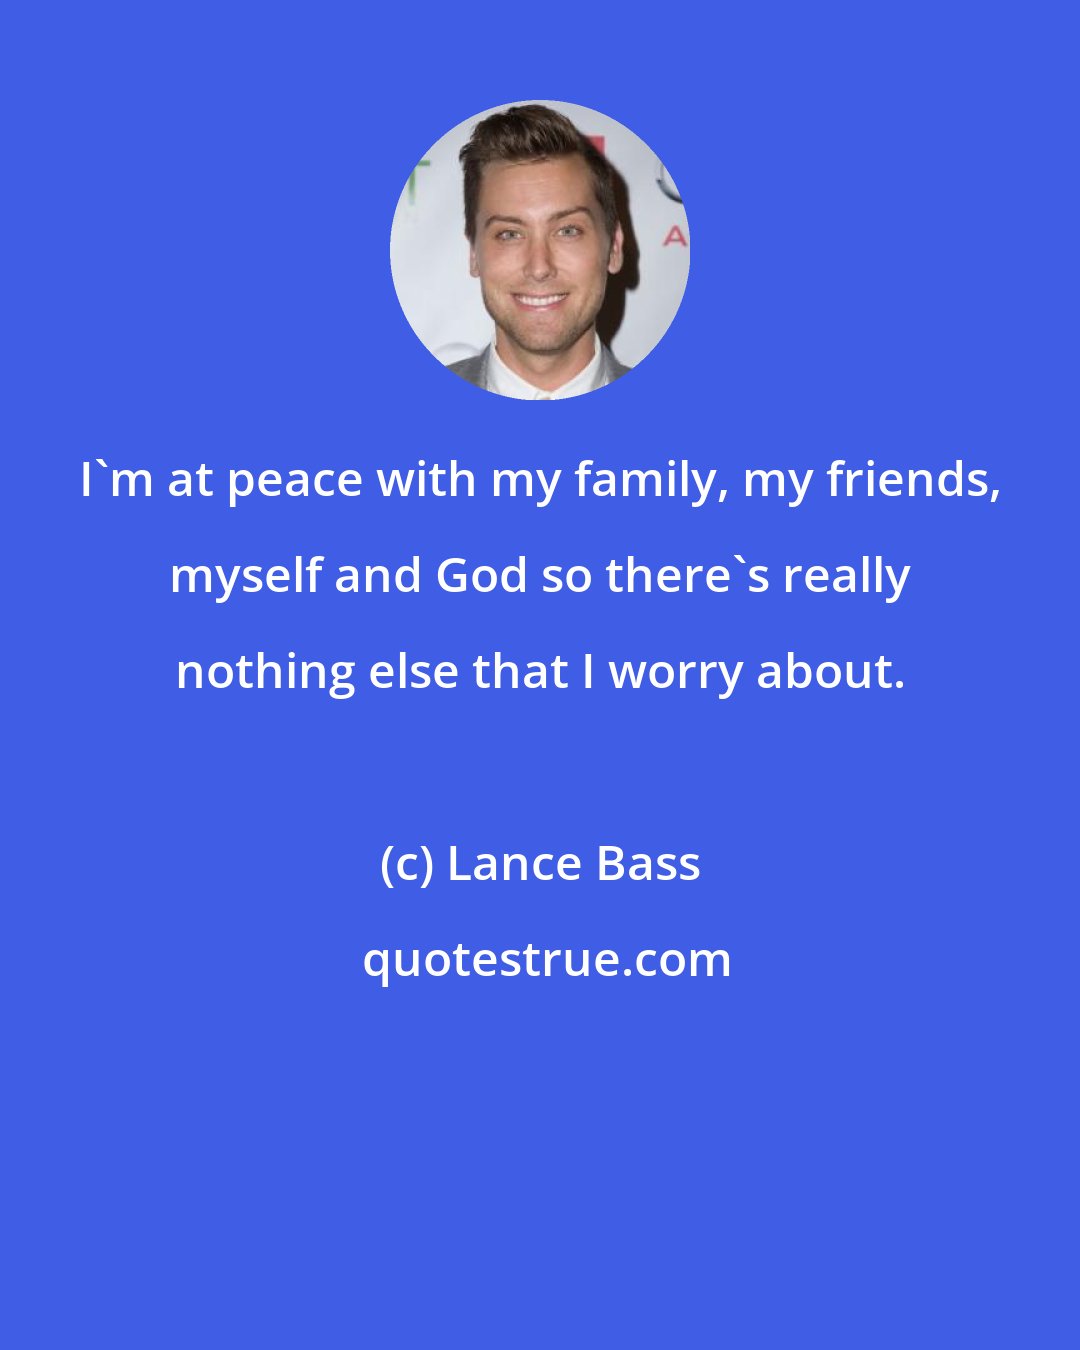 Lance Bass: I'm at peace with my family, my friends, myself and God so there's really nothing else that I worry about.